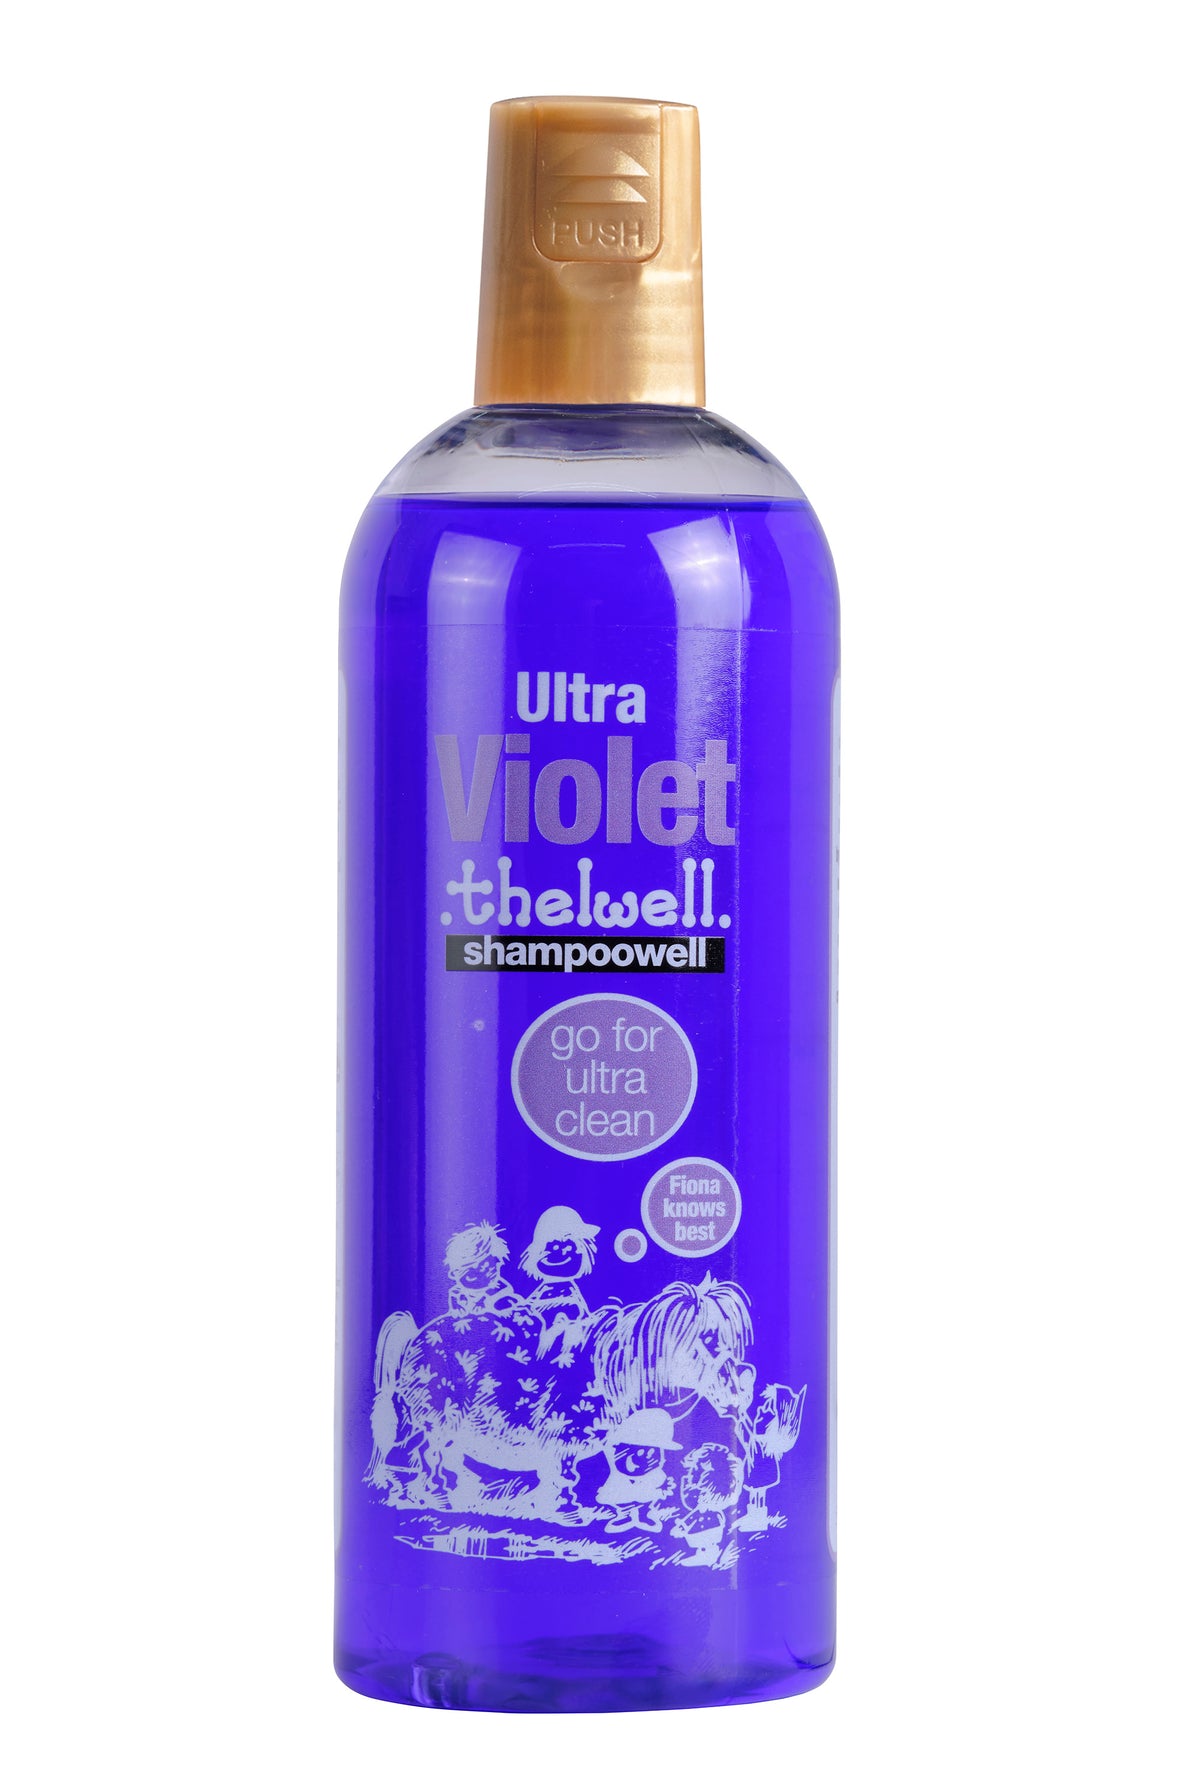 Thelwell ultra violet shampoo